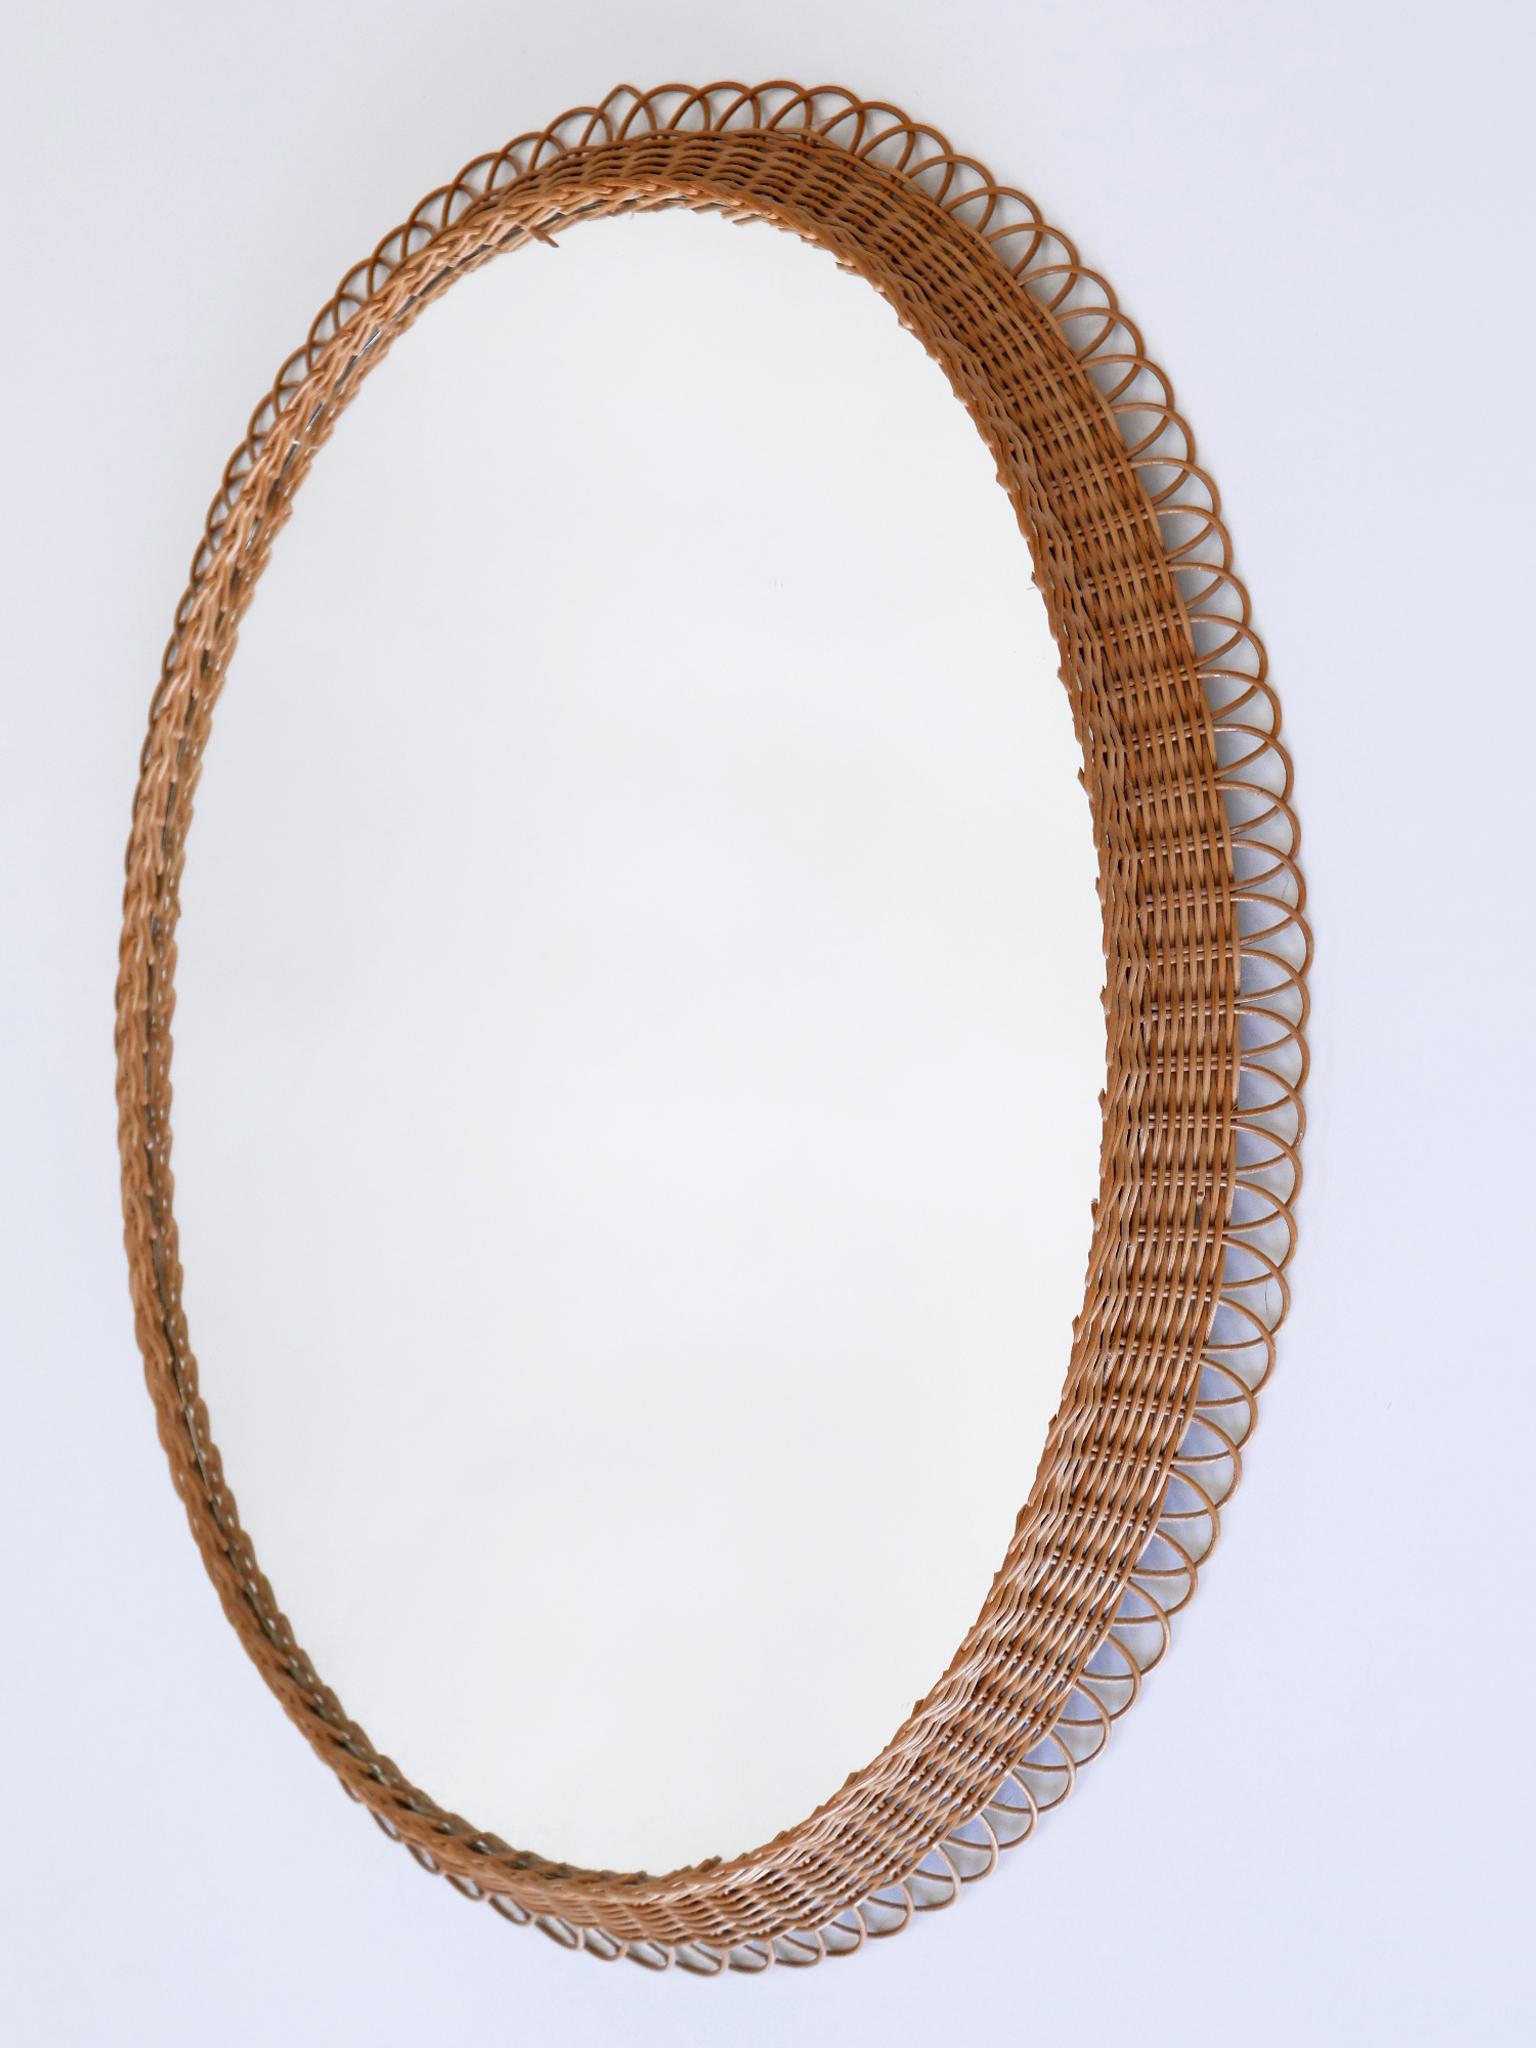 Decorative Mid-Century Modern Rattan Oval Wall Mirror Germany, 1960s For Sale 8